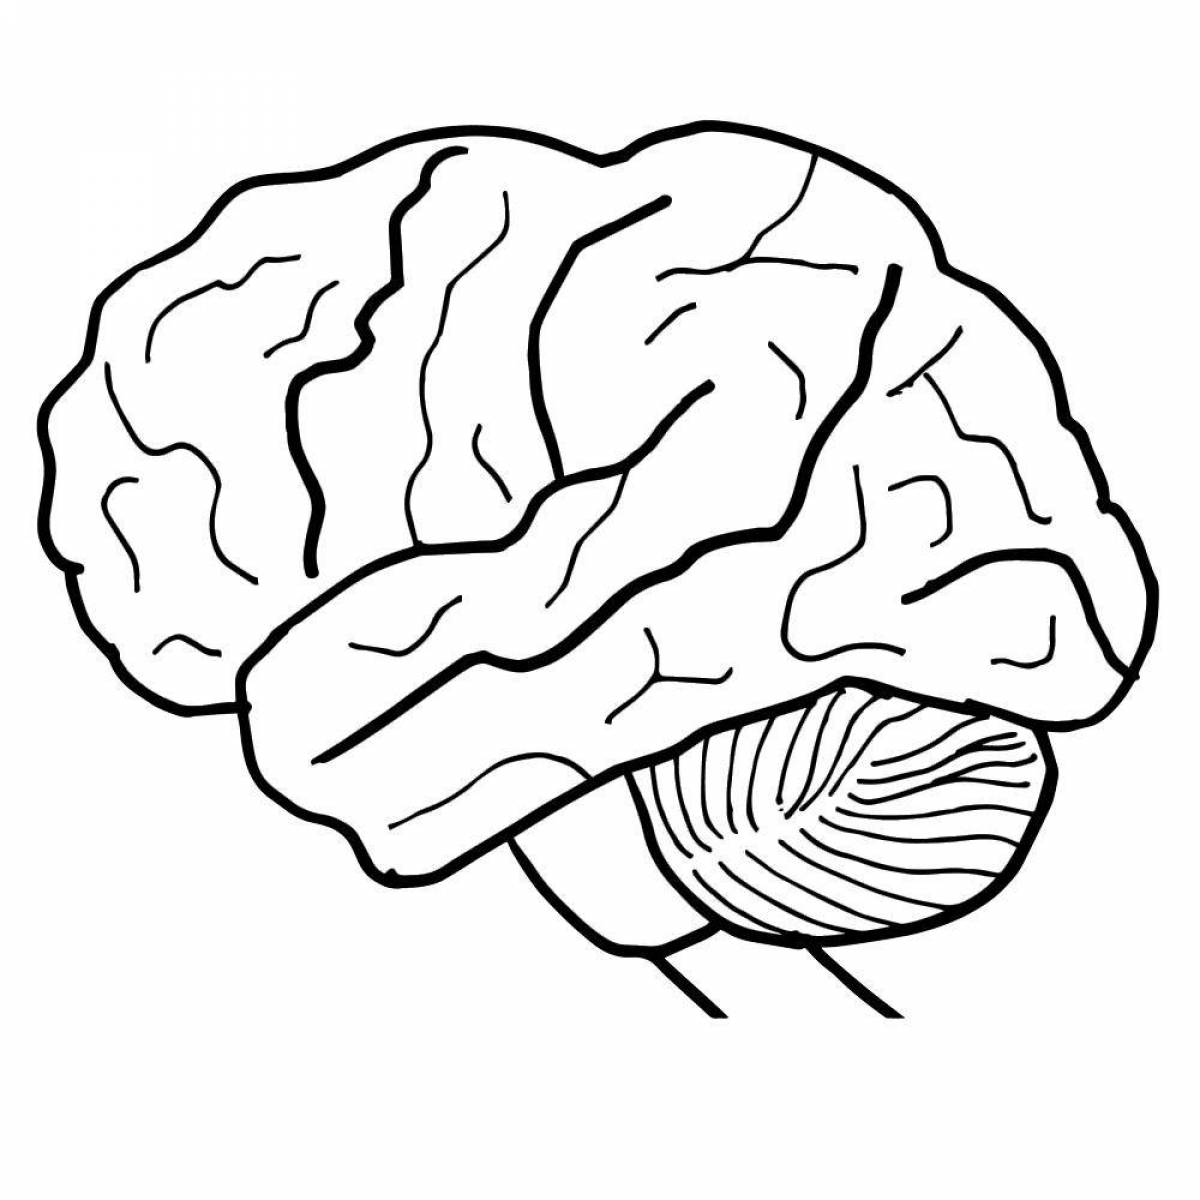 Intricate brain coloring page